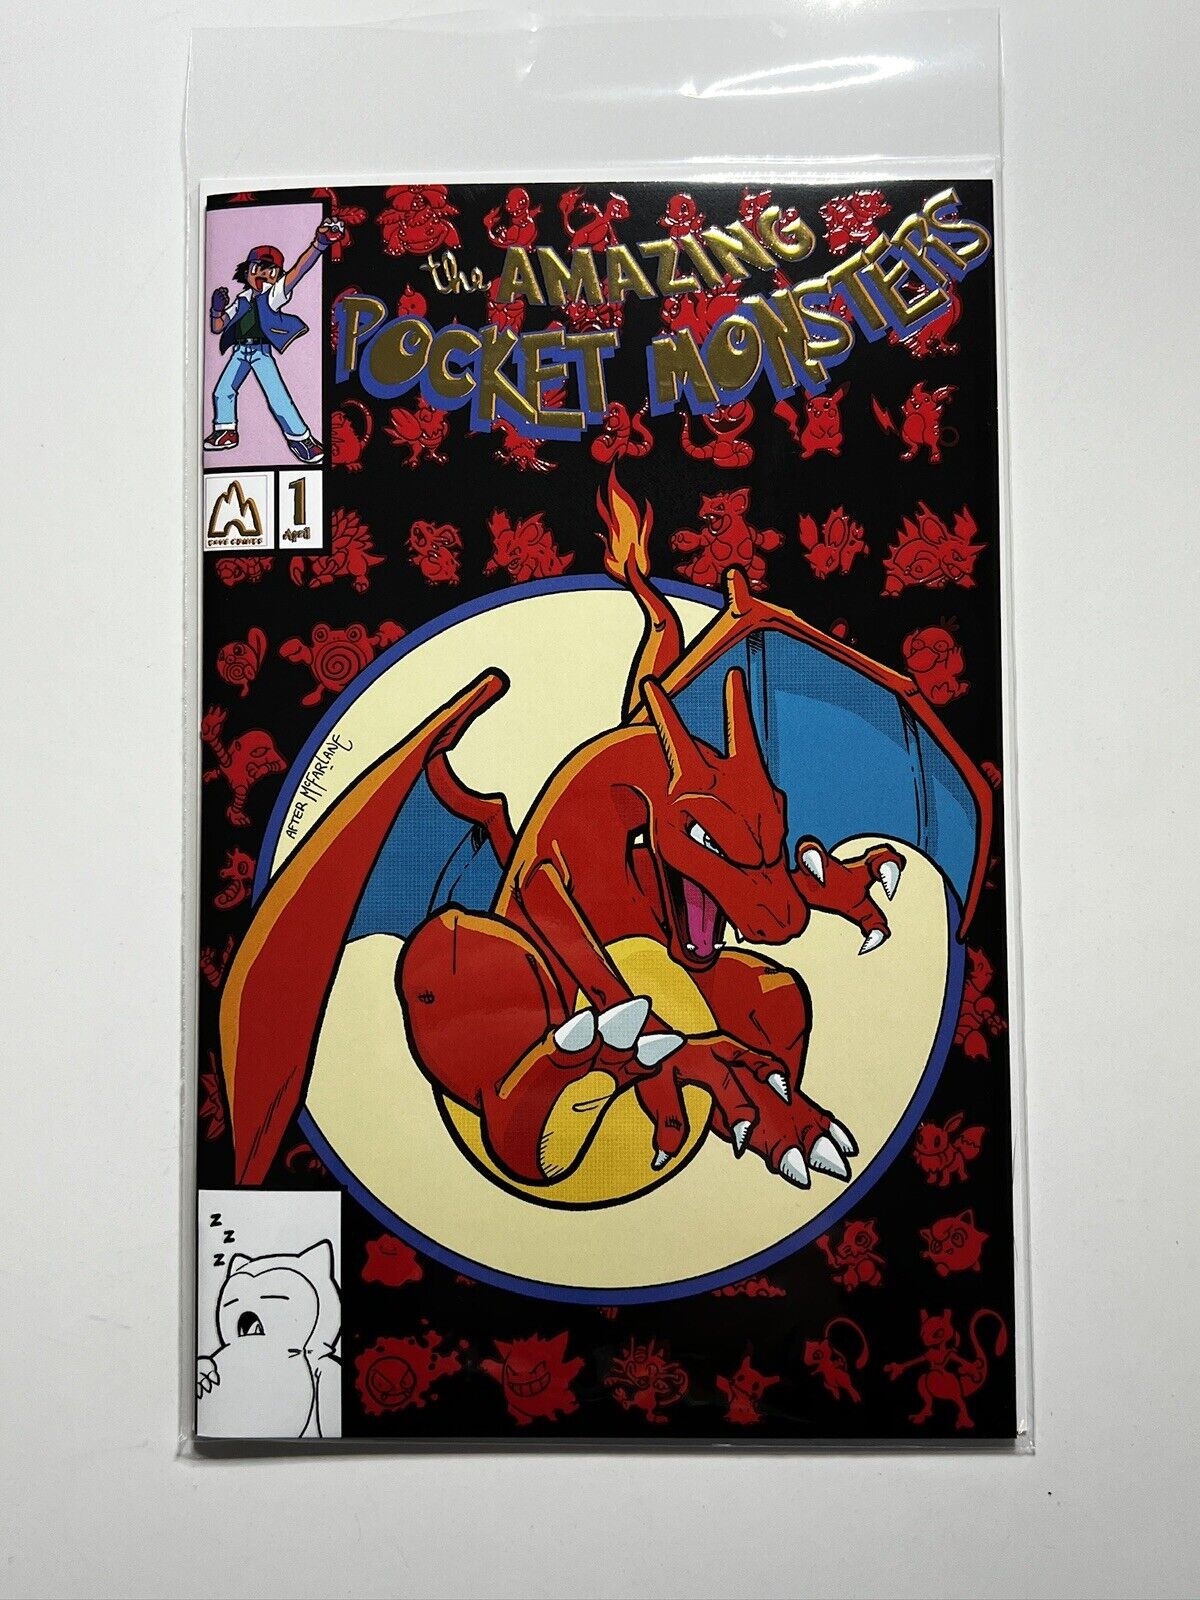 L👀K C2E2 Excl AMAZING Pocket Monsters SET #1 Charizard & Carnage /100 /75 Rare